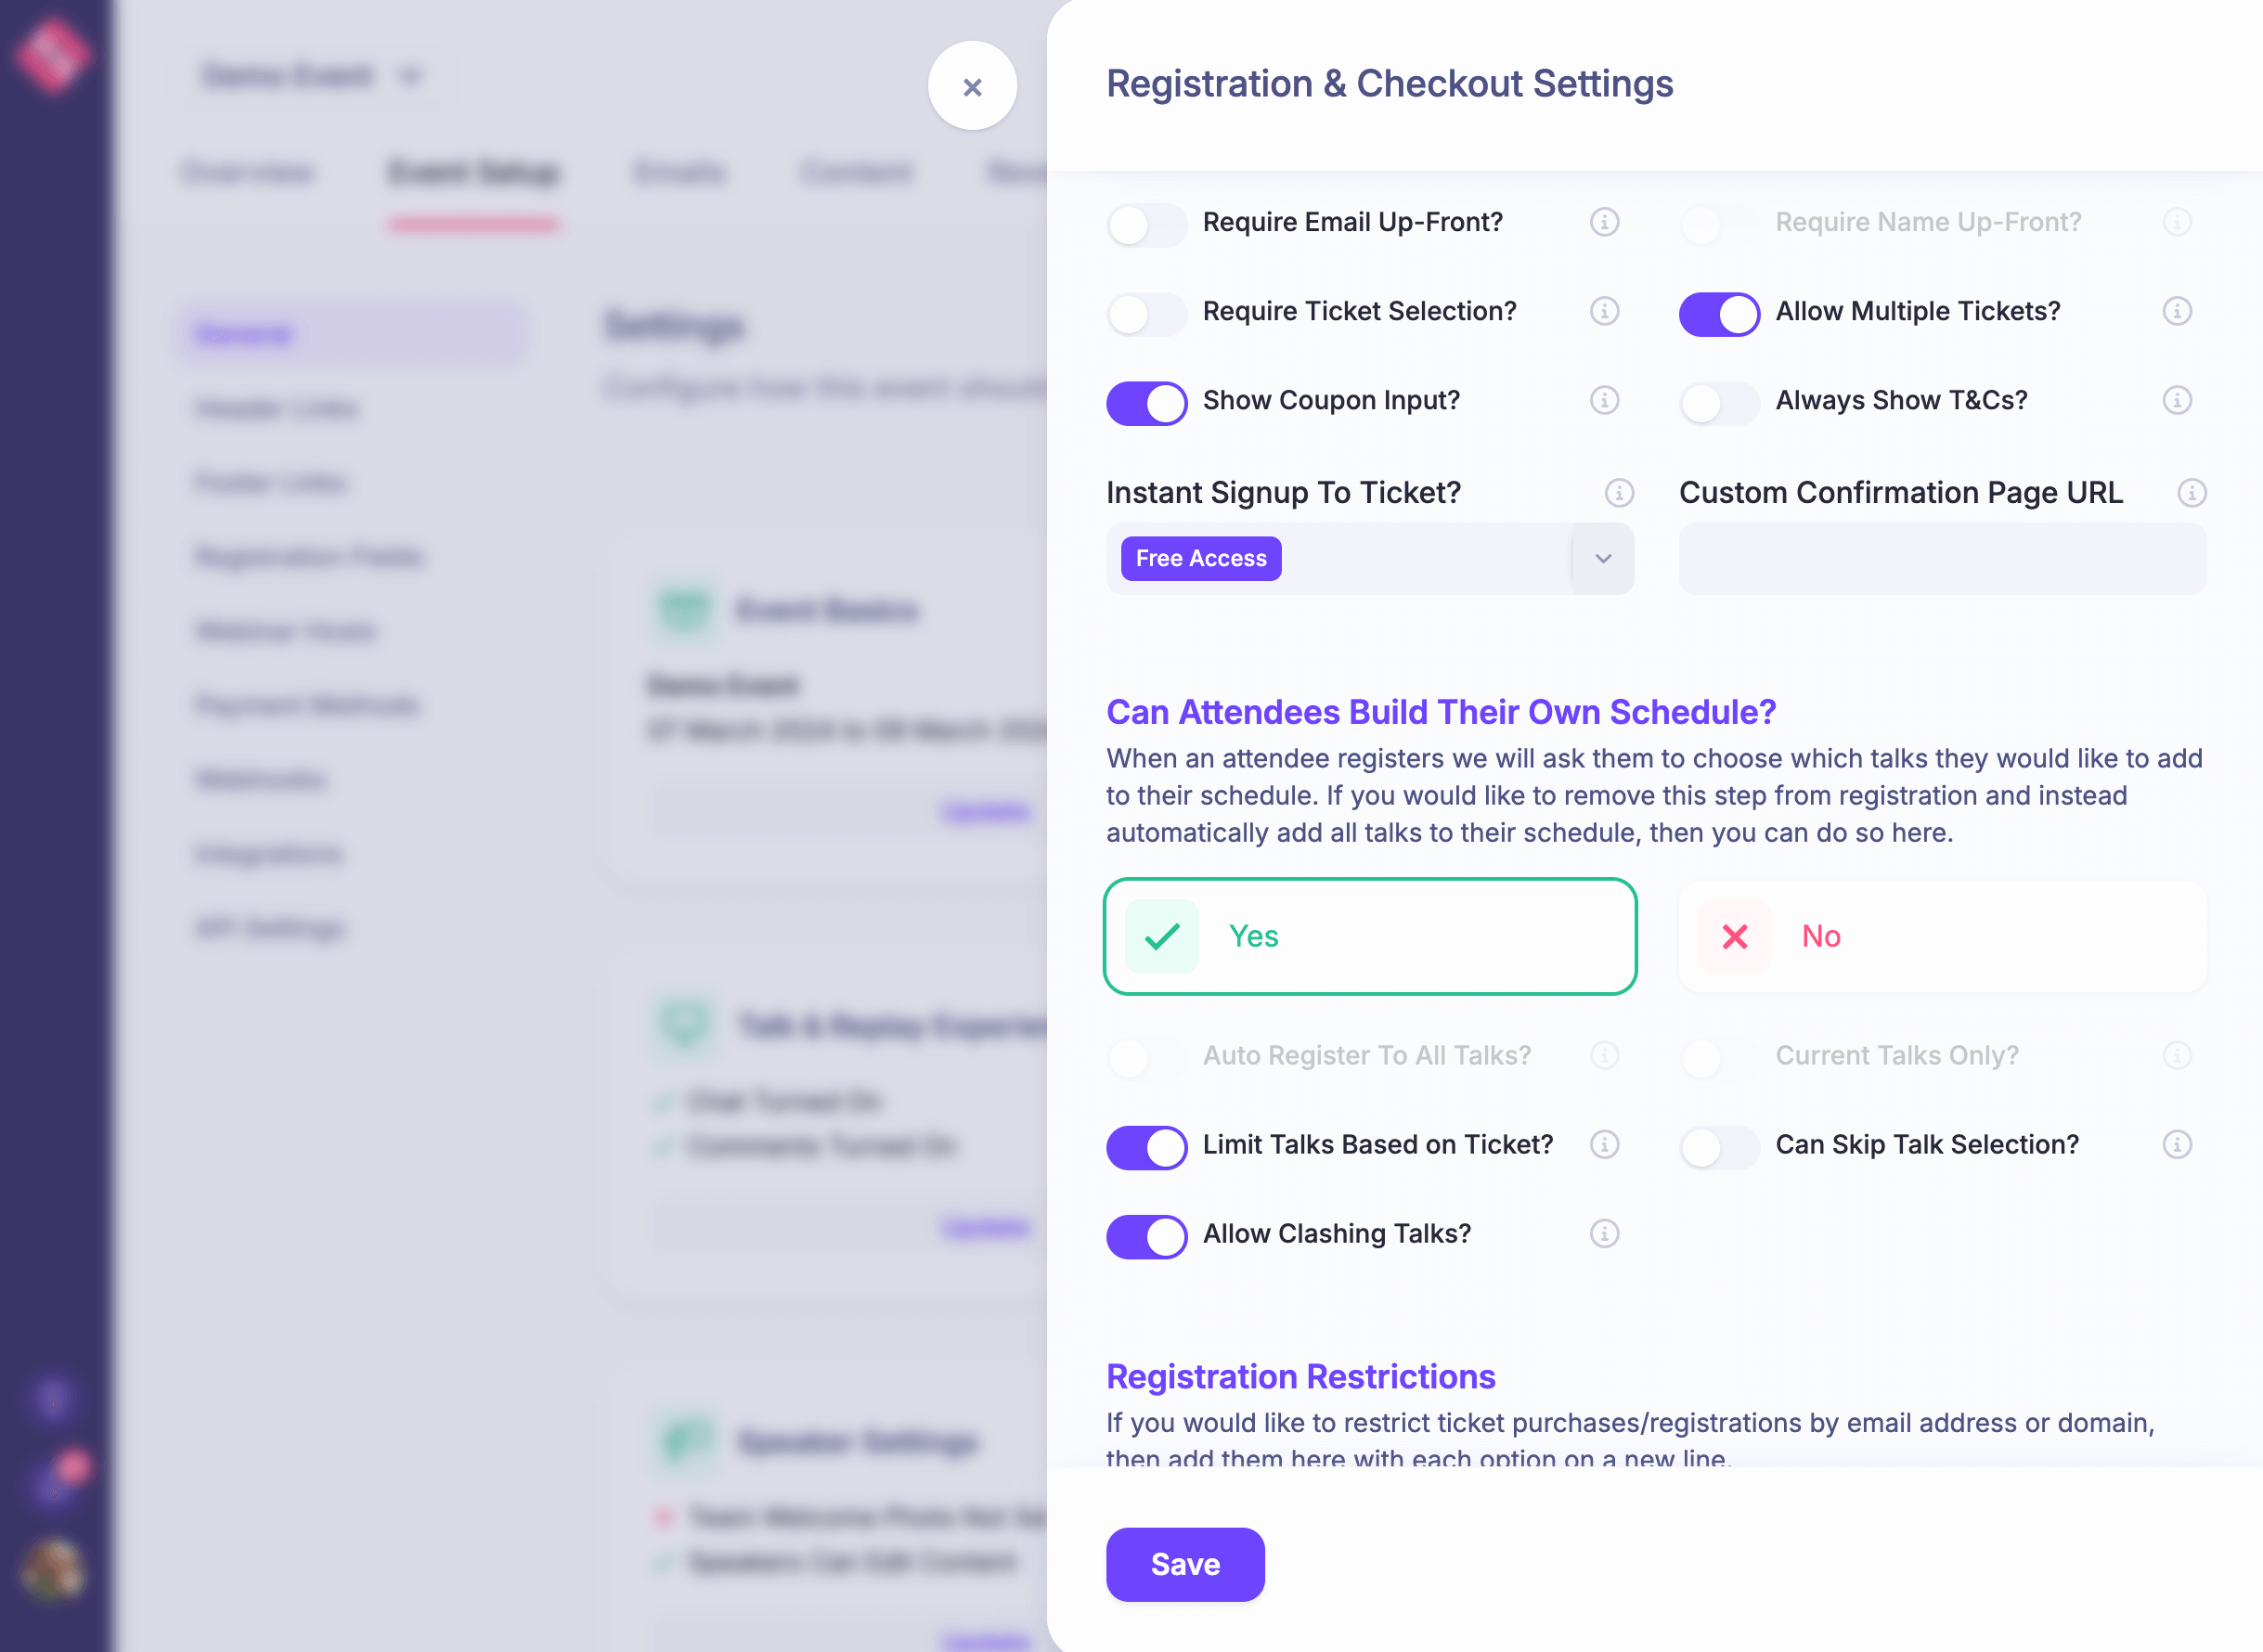 Customise almost every aspect of the checkout experience to create the perfect flow for your audience.